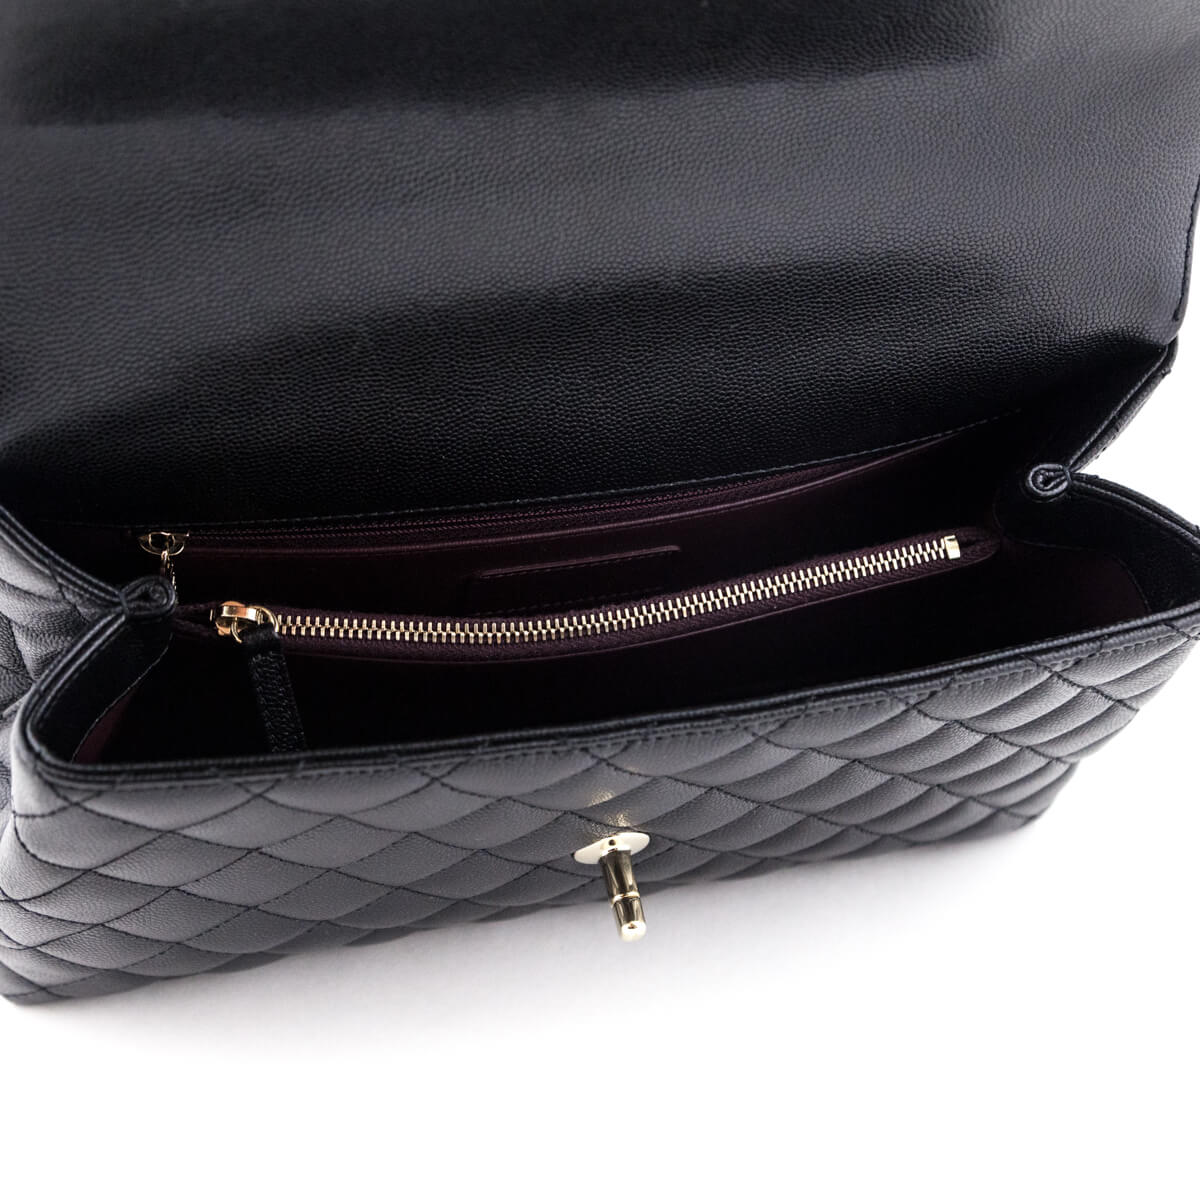 Chanel Black Quilted Caviar Small Coco Handle Flap Bag - Love that Bag etc - Preowned Authentic Designer Handbags & Preloved Fashions